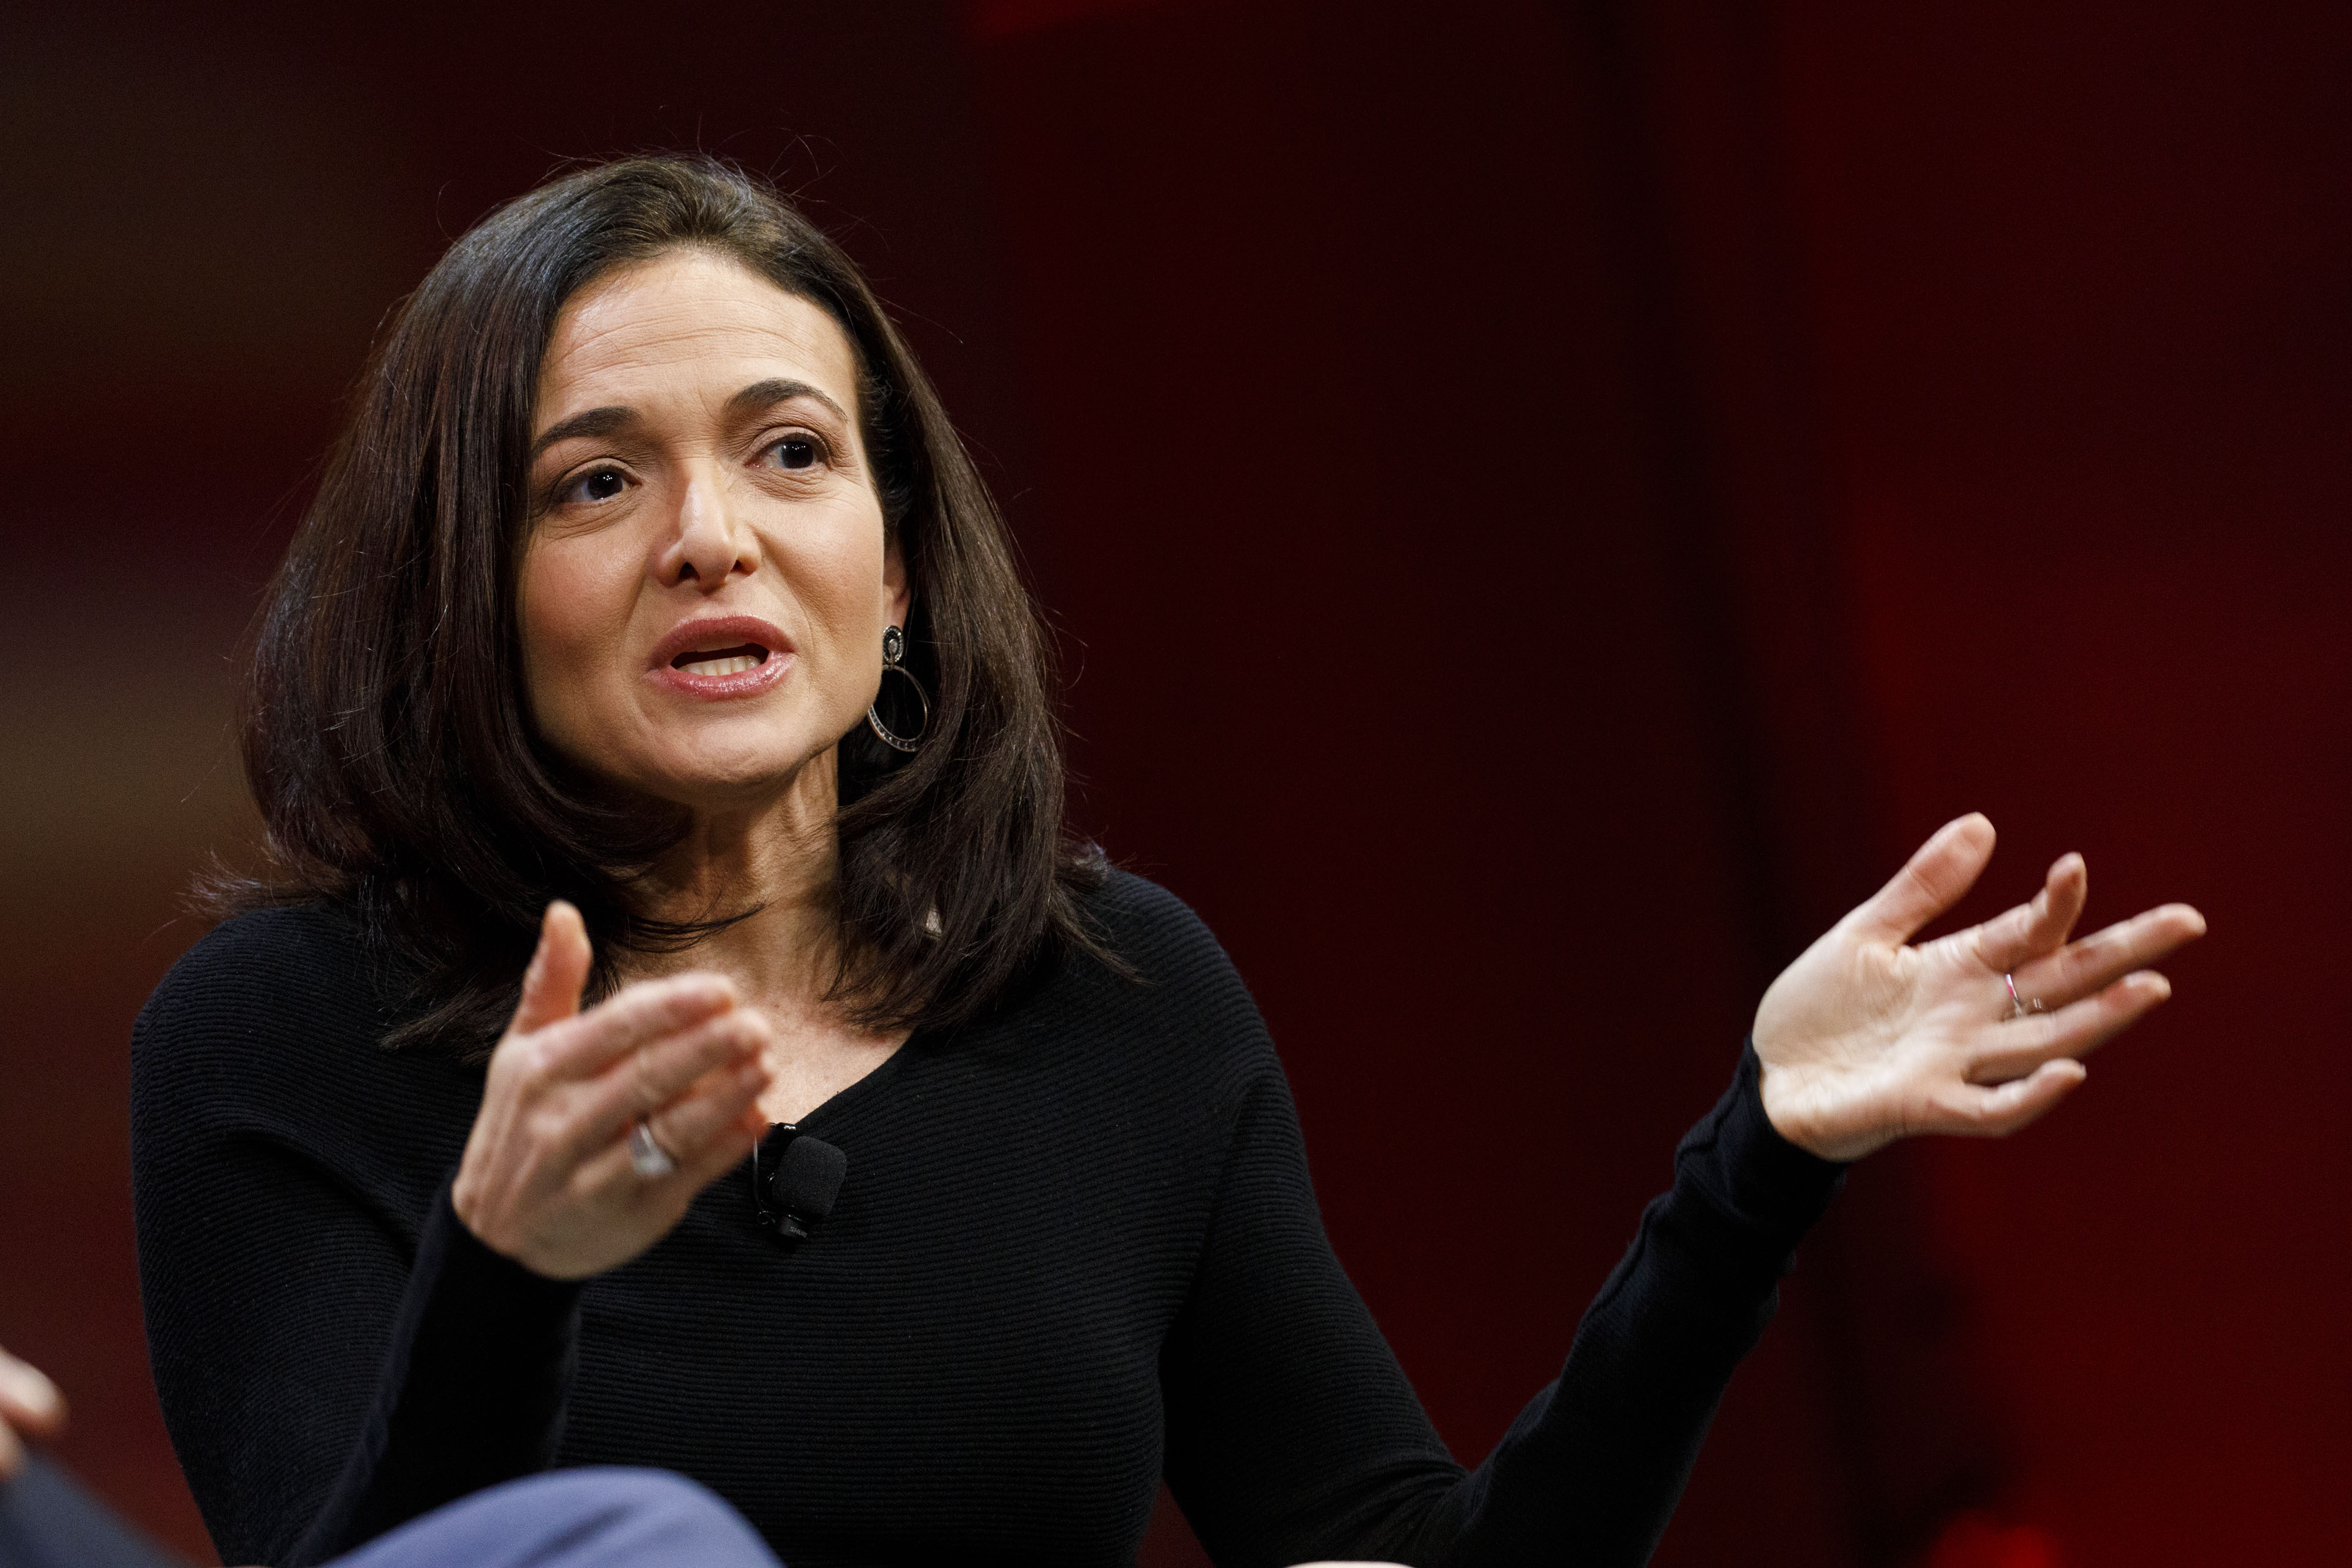 Sheryl Sandberg, chief operating officer of Facebook Inc., speaks during the 2018 Makers Conference in Hollywood, California, U.S., on Tuesday, Feb. 6, 2018. (Bloomberg—Bloomberg via Getty Images)